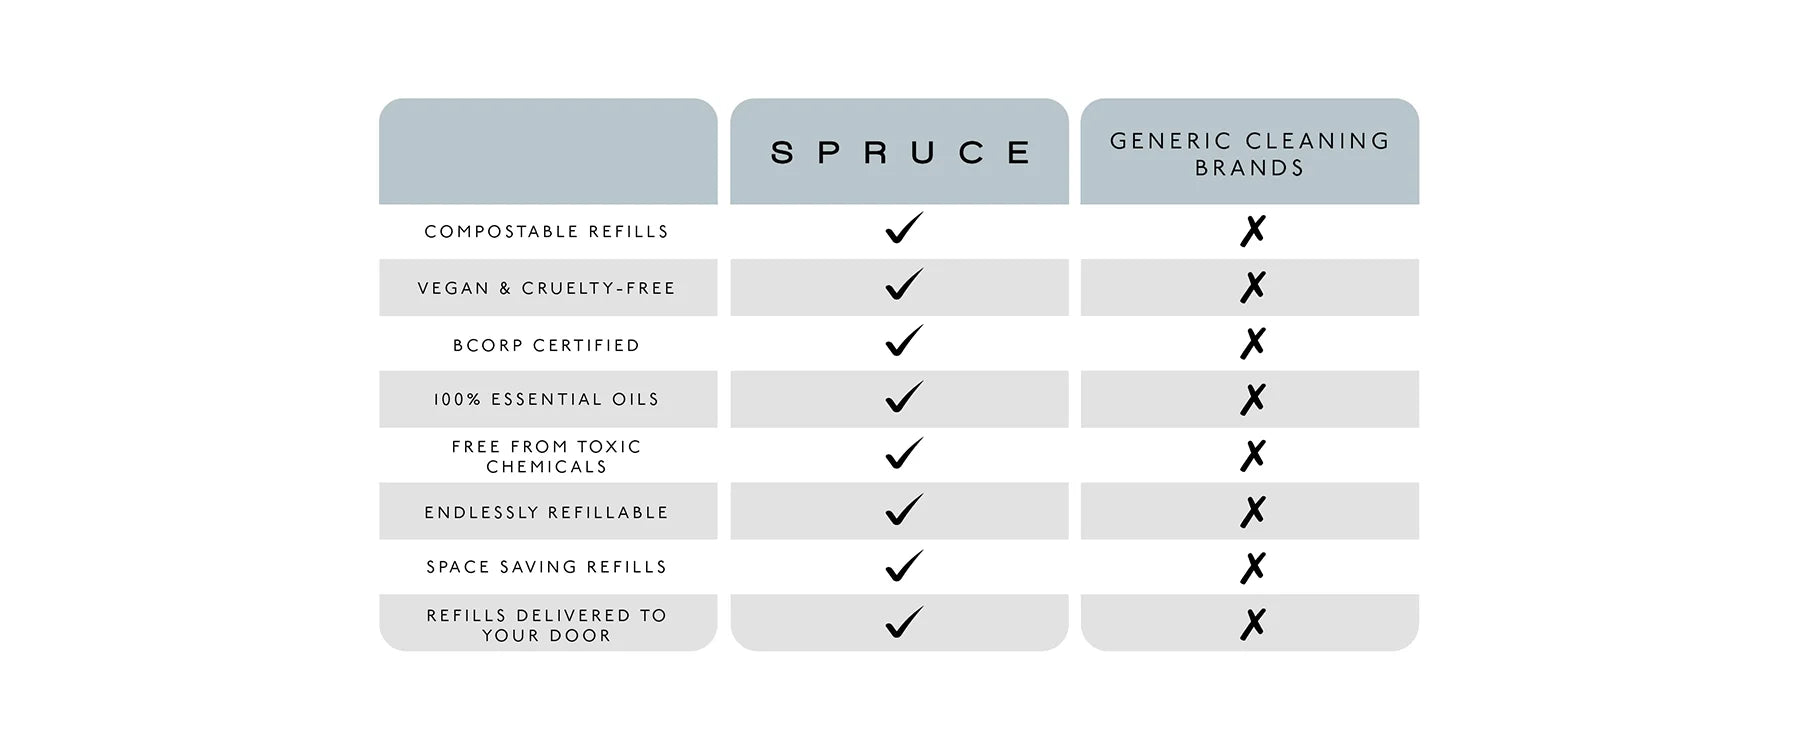 spruce cleaning sprays compared to mainstream brands